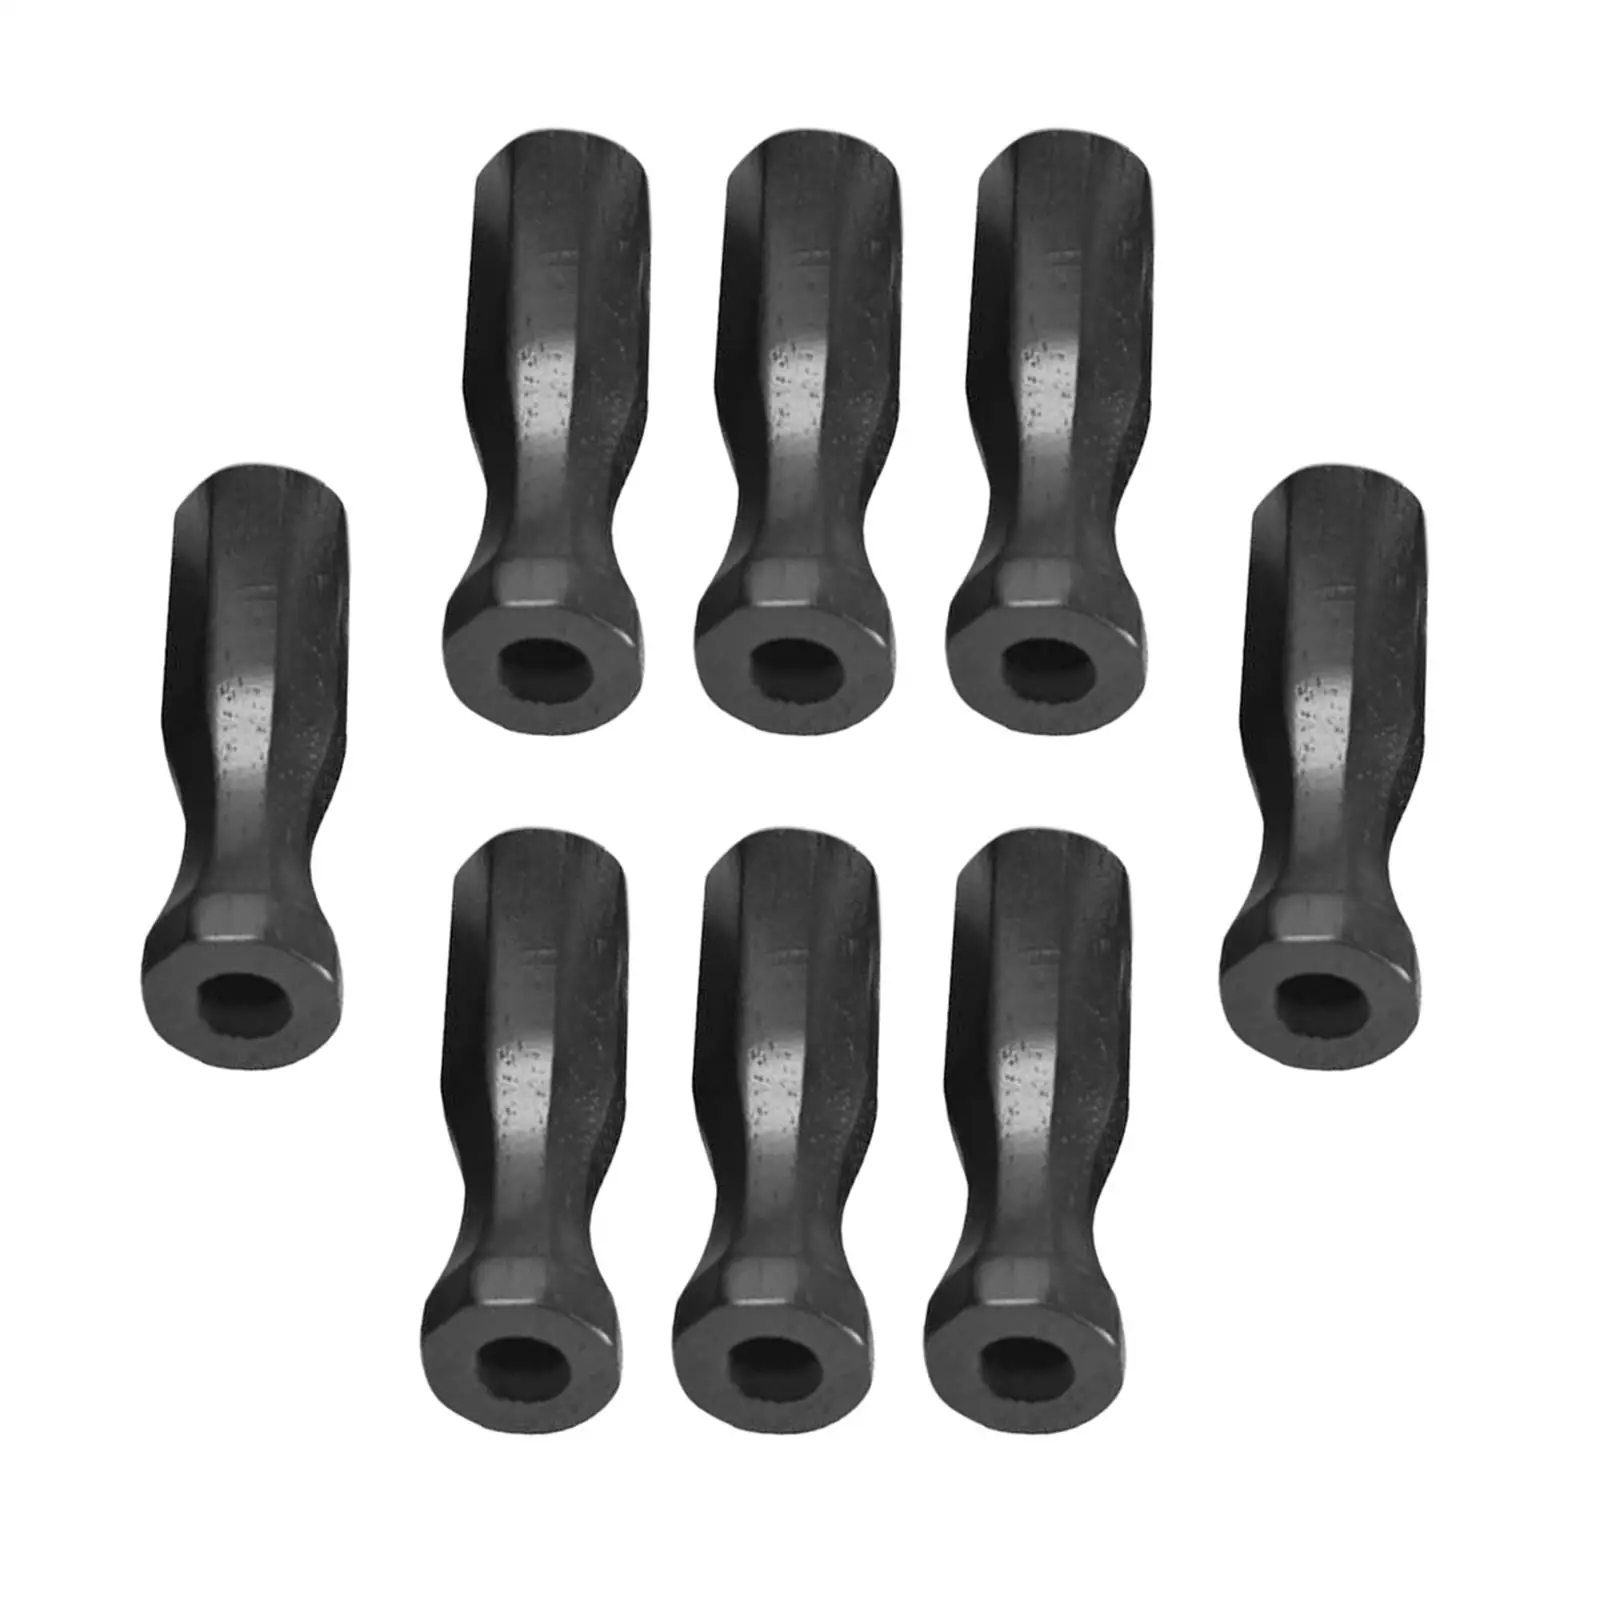 8pcs Soccer Table Handles Non-slip Foosball Grip, Portable Replacements for